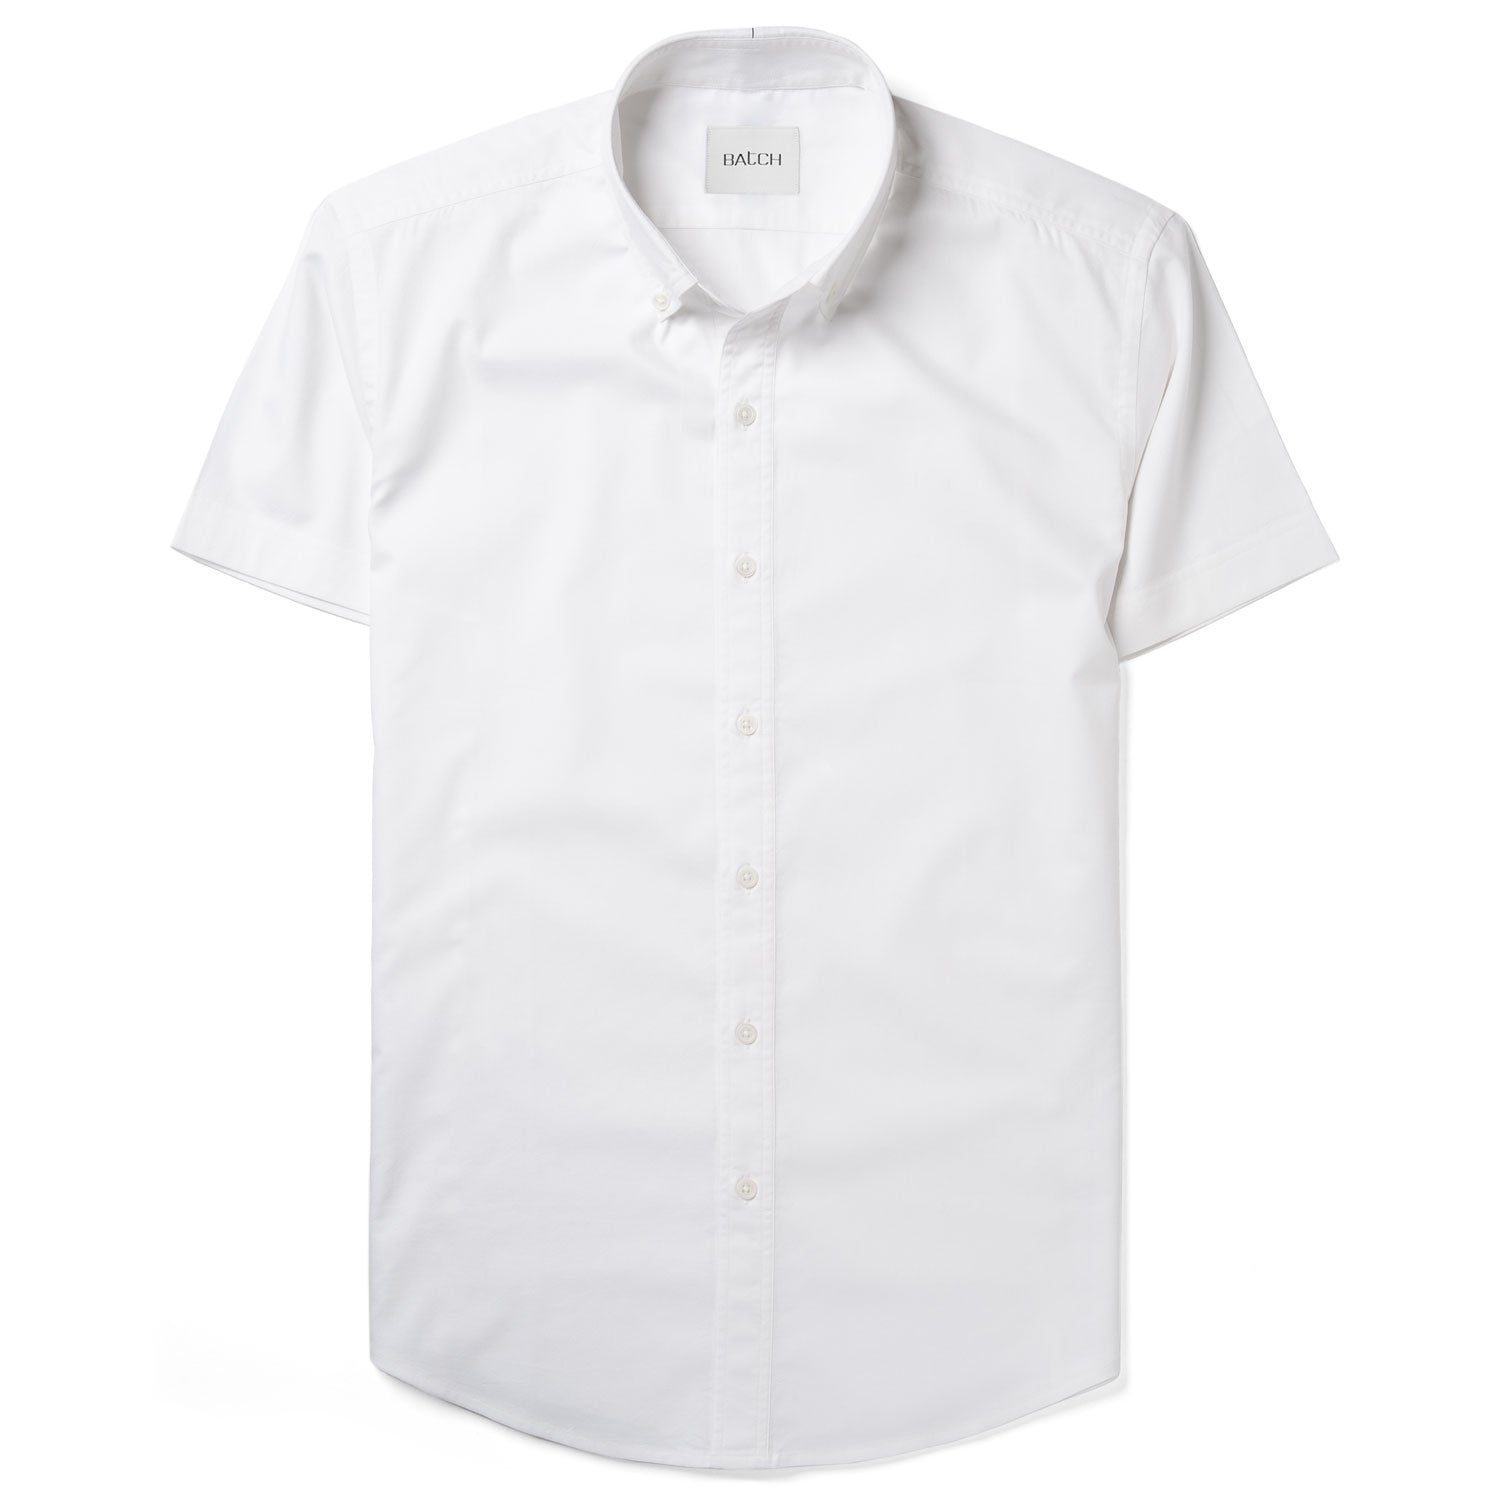 Essential Casual Short Sleeve Shirt - White Cotton Twill